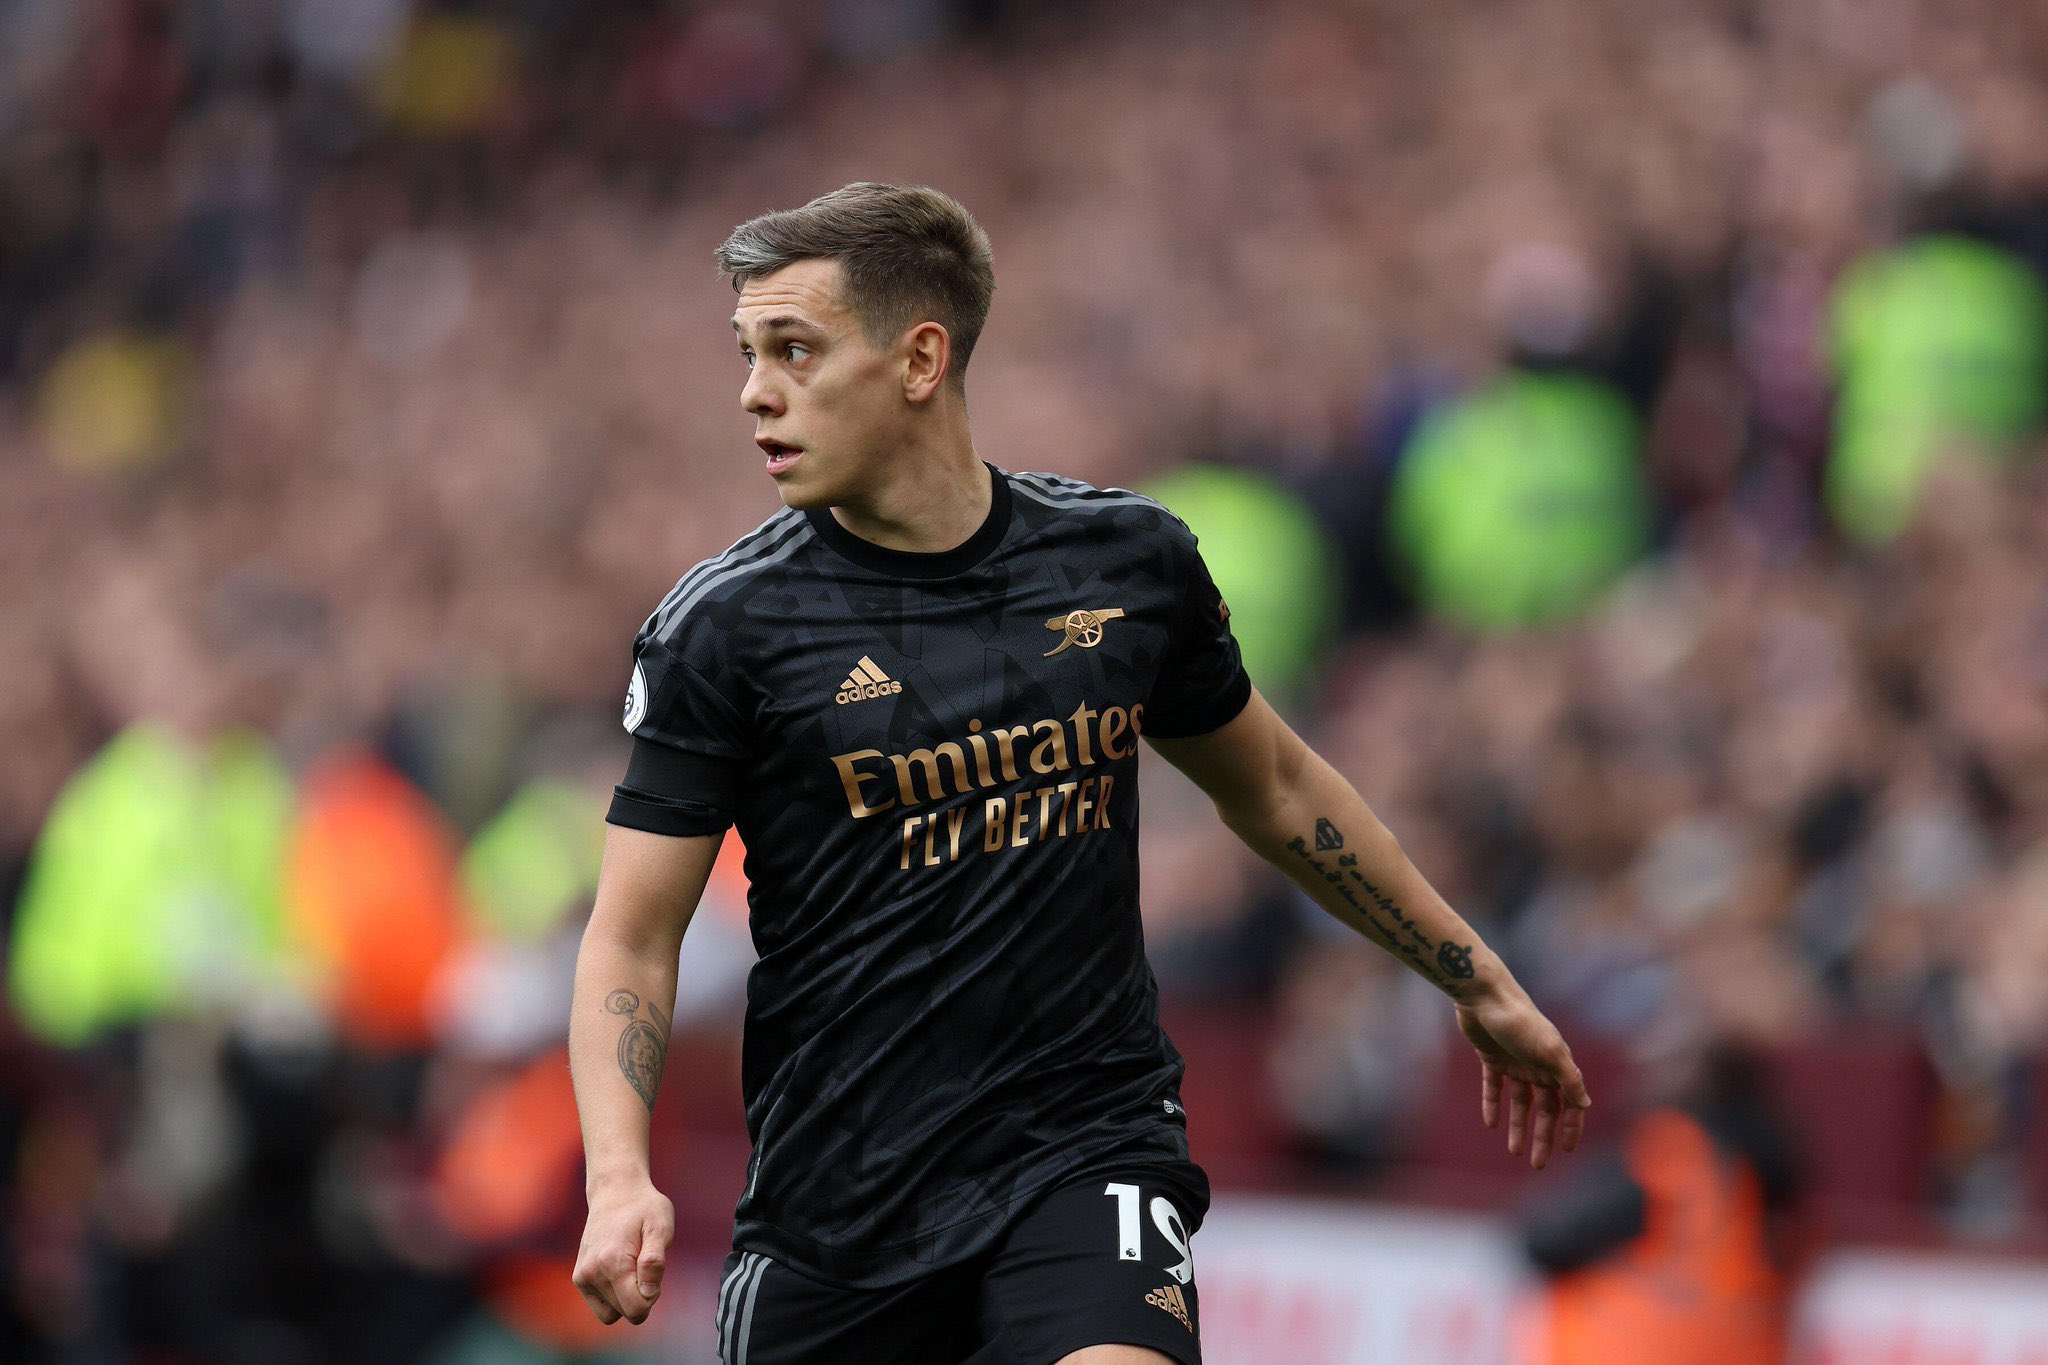 Leandro Trossard makes Premier League history with hat-trick of assists in incredible Arsenal first half against Fulham